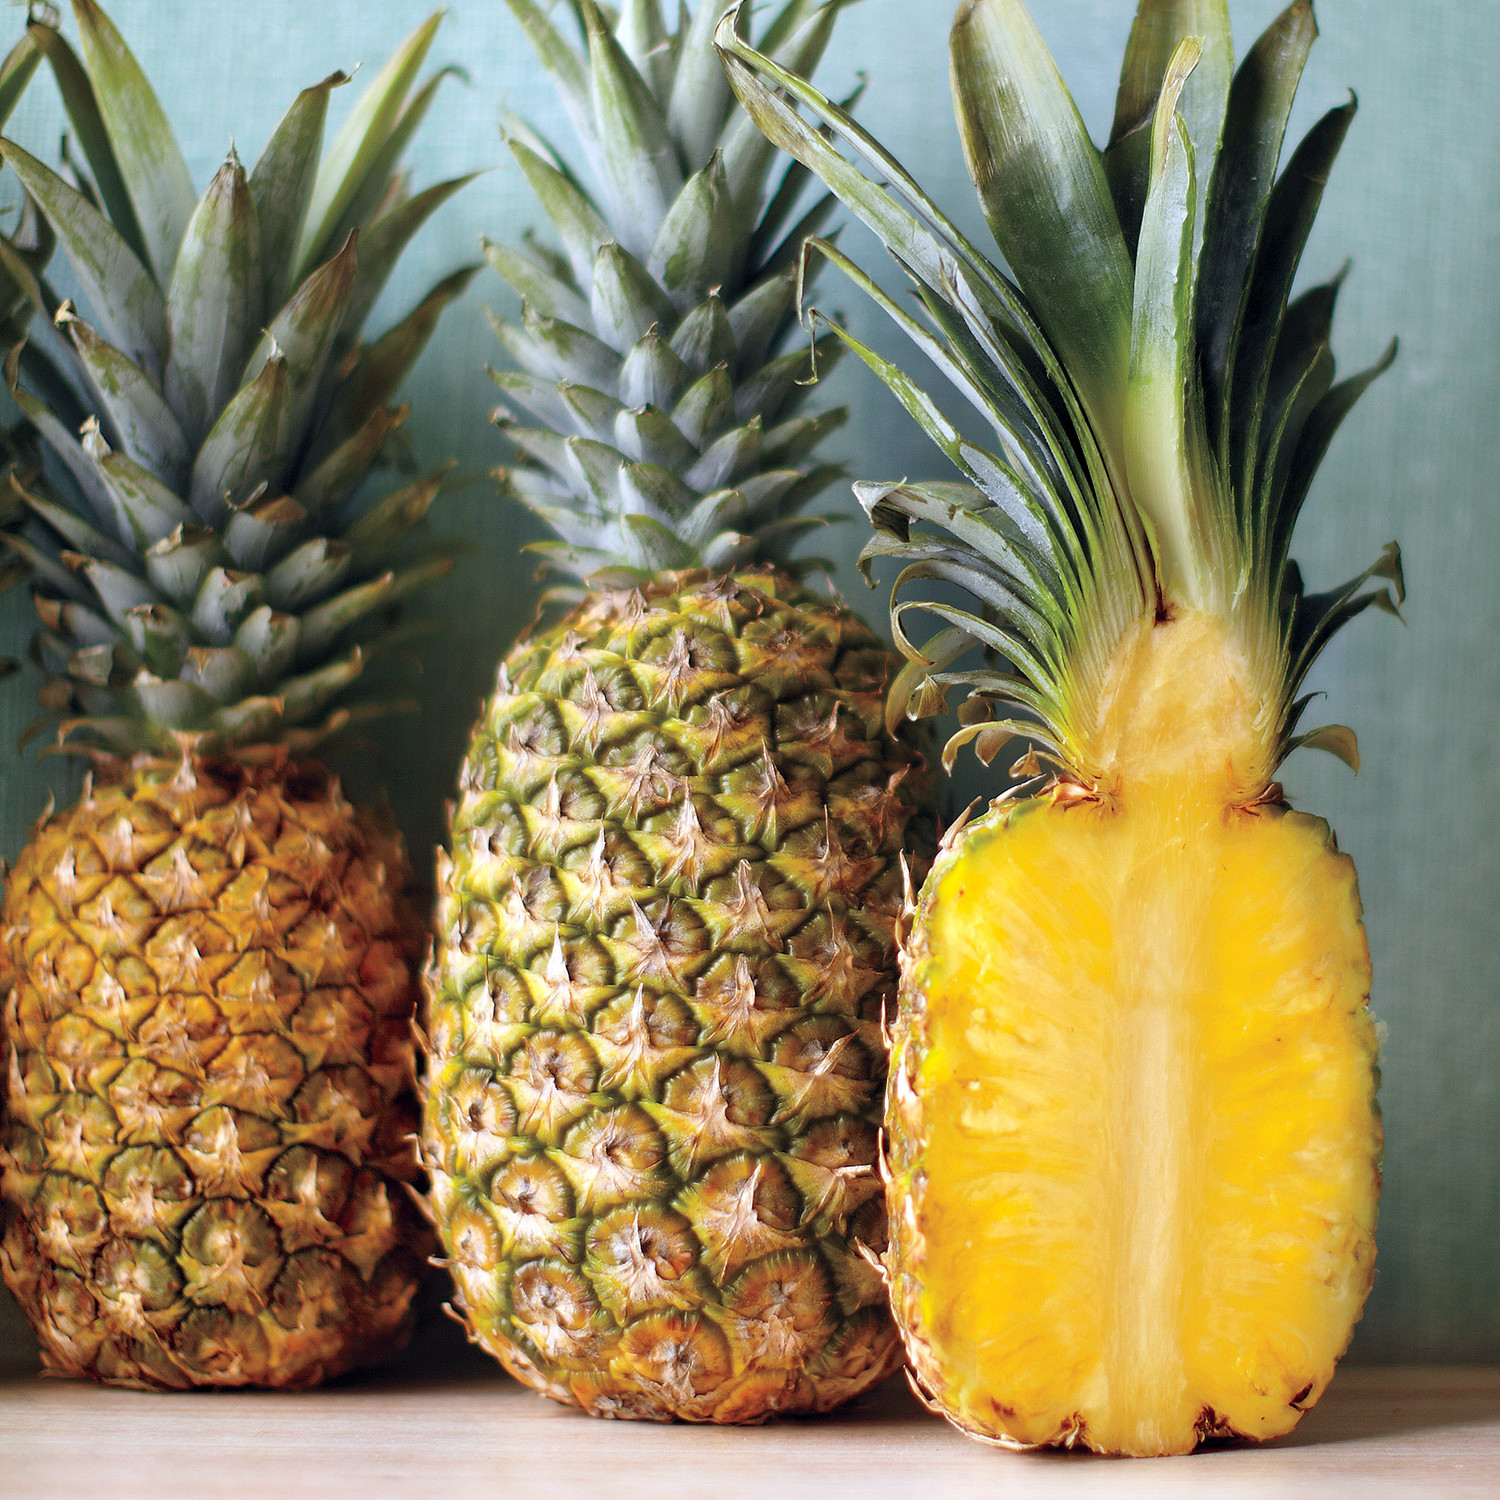 27 Pineapple Recipes That Will Make You Fall for the Sweet, Juicy ...